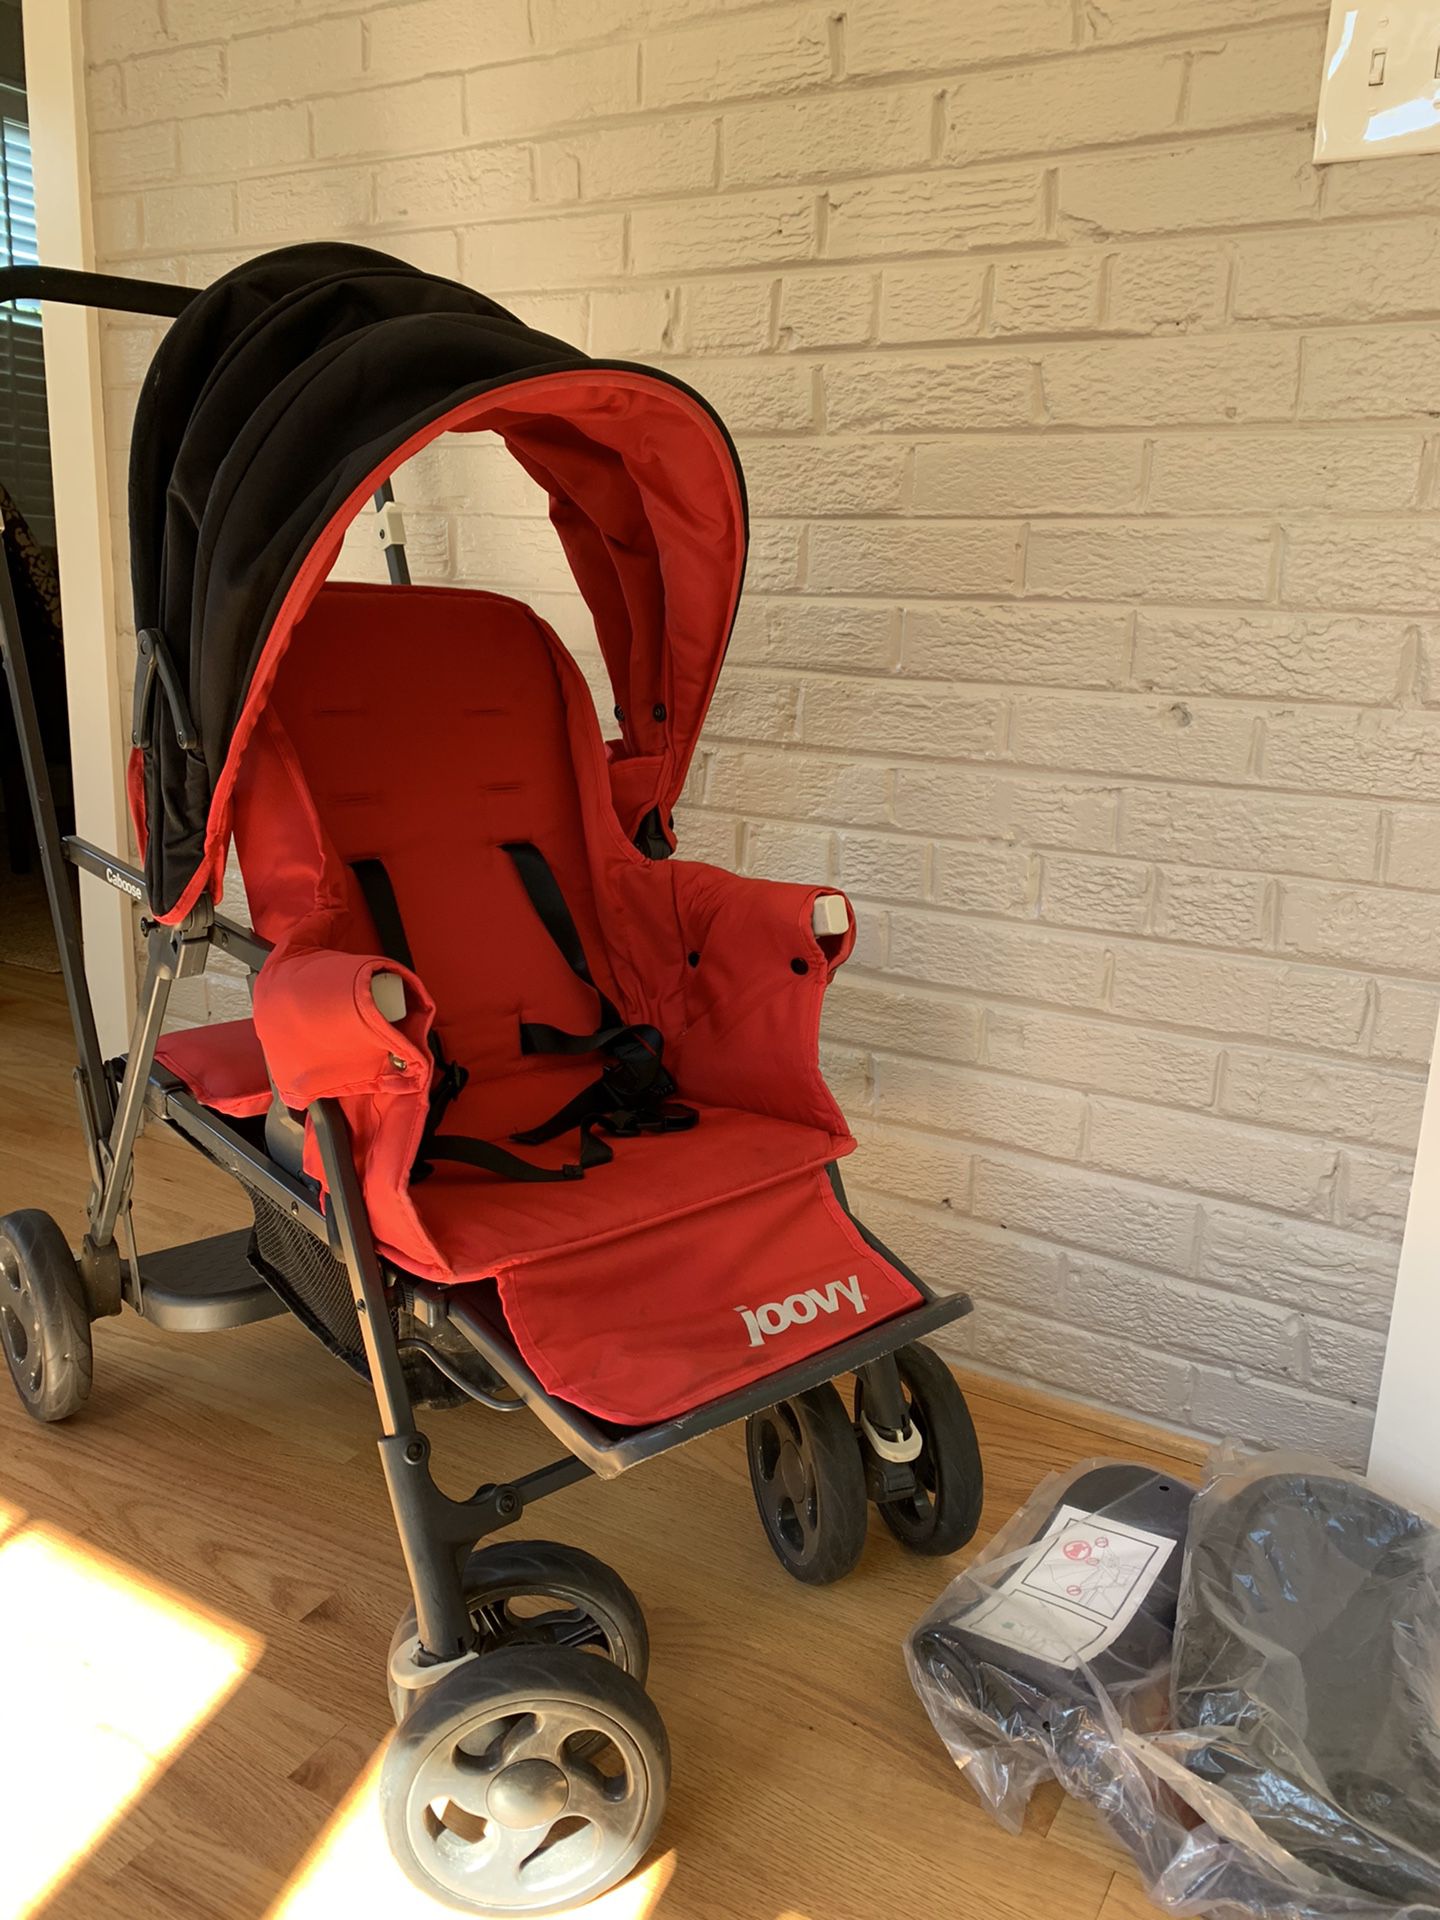 Joovy sit and stand double stroller